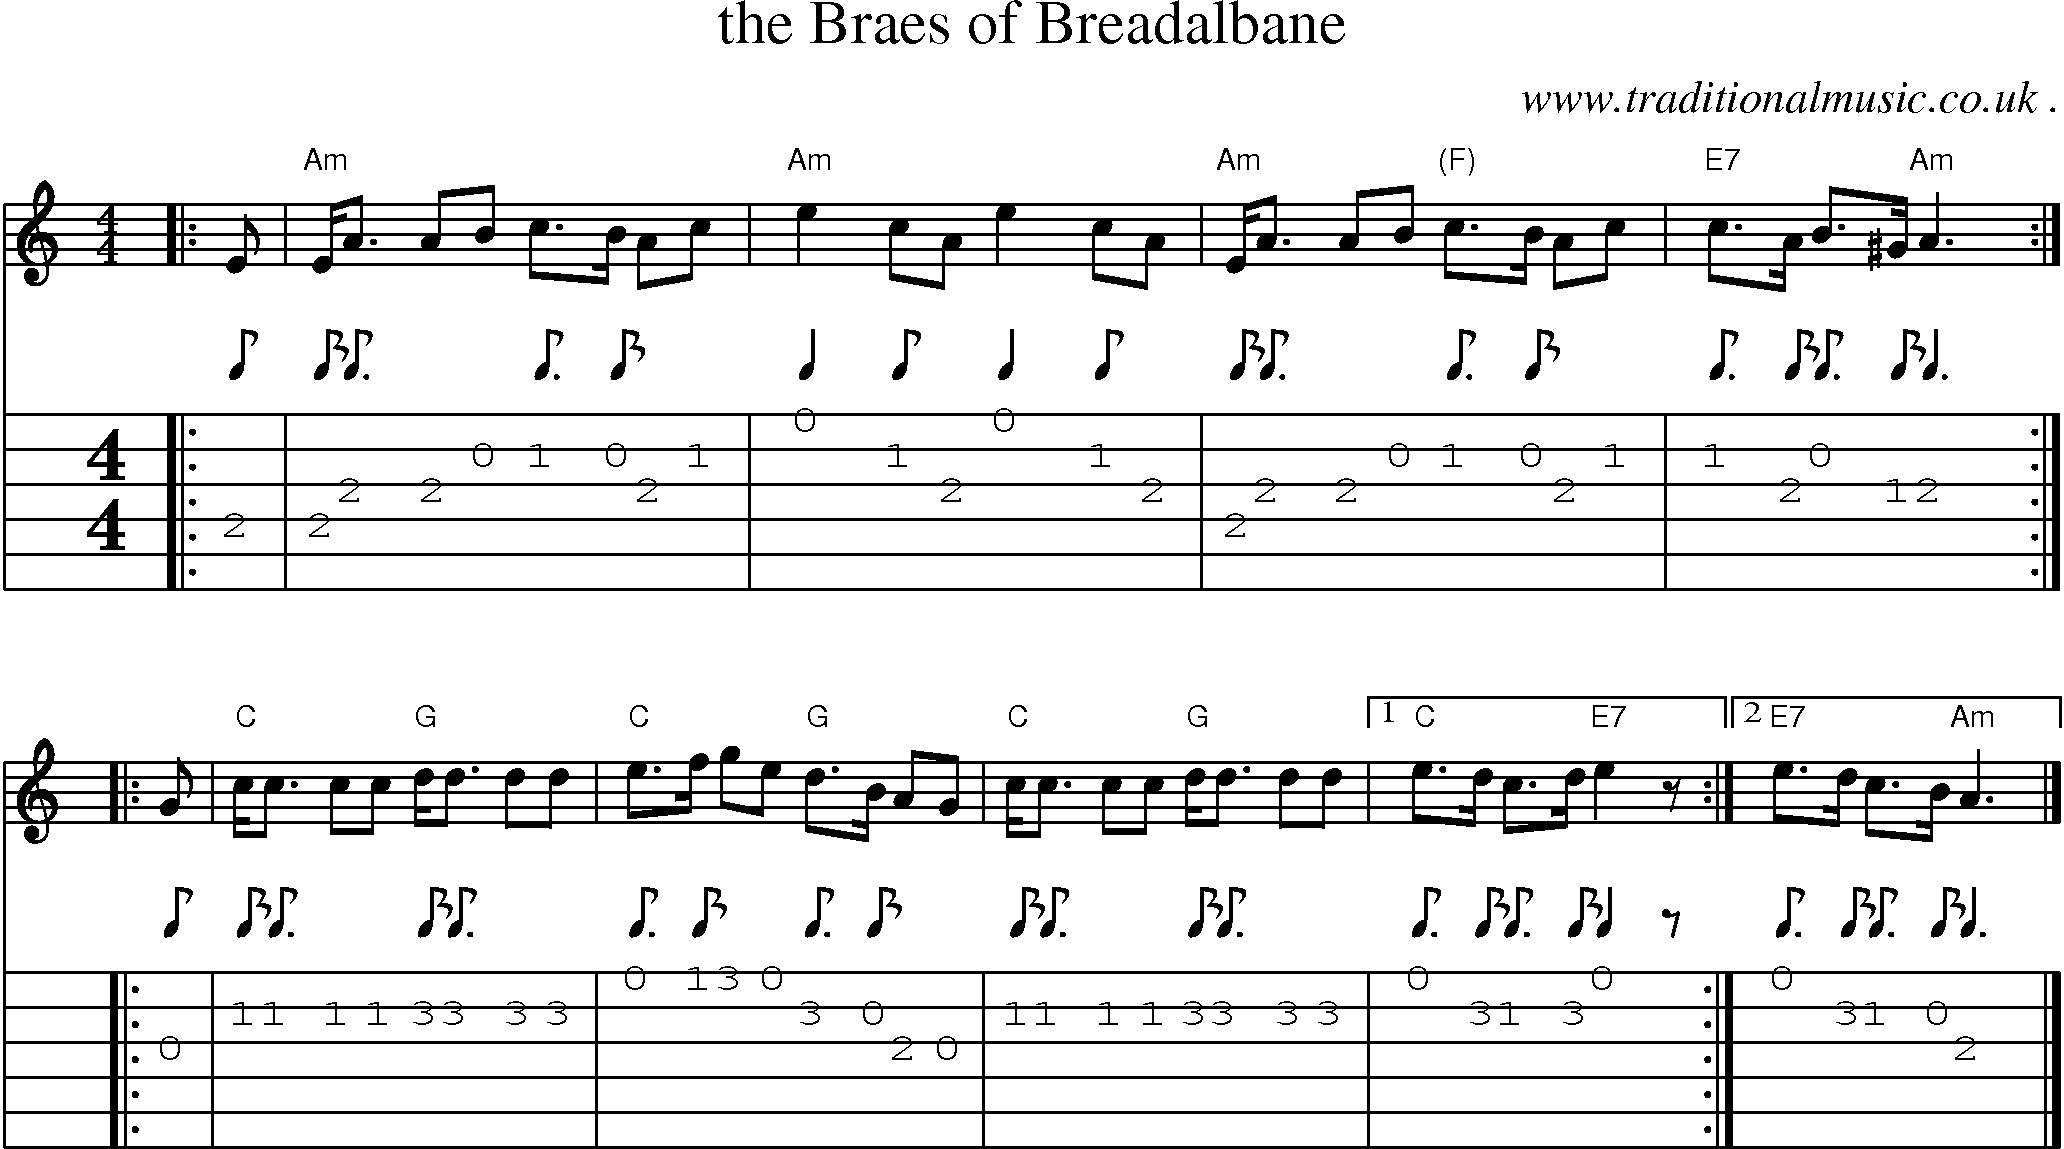 Sheet-music  score, Chords and Guitar Tabs for The Braes Of Breadalbane